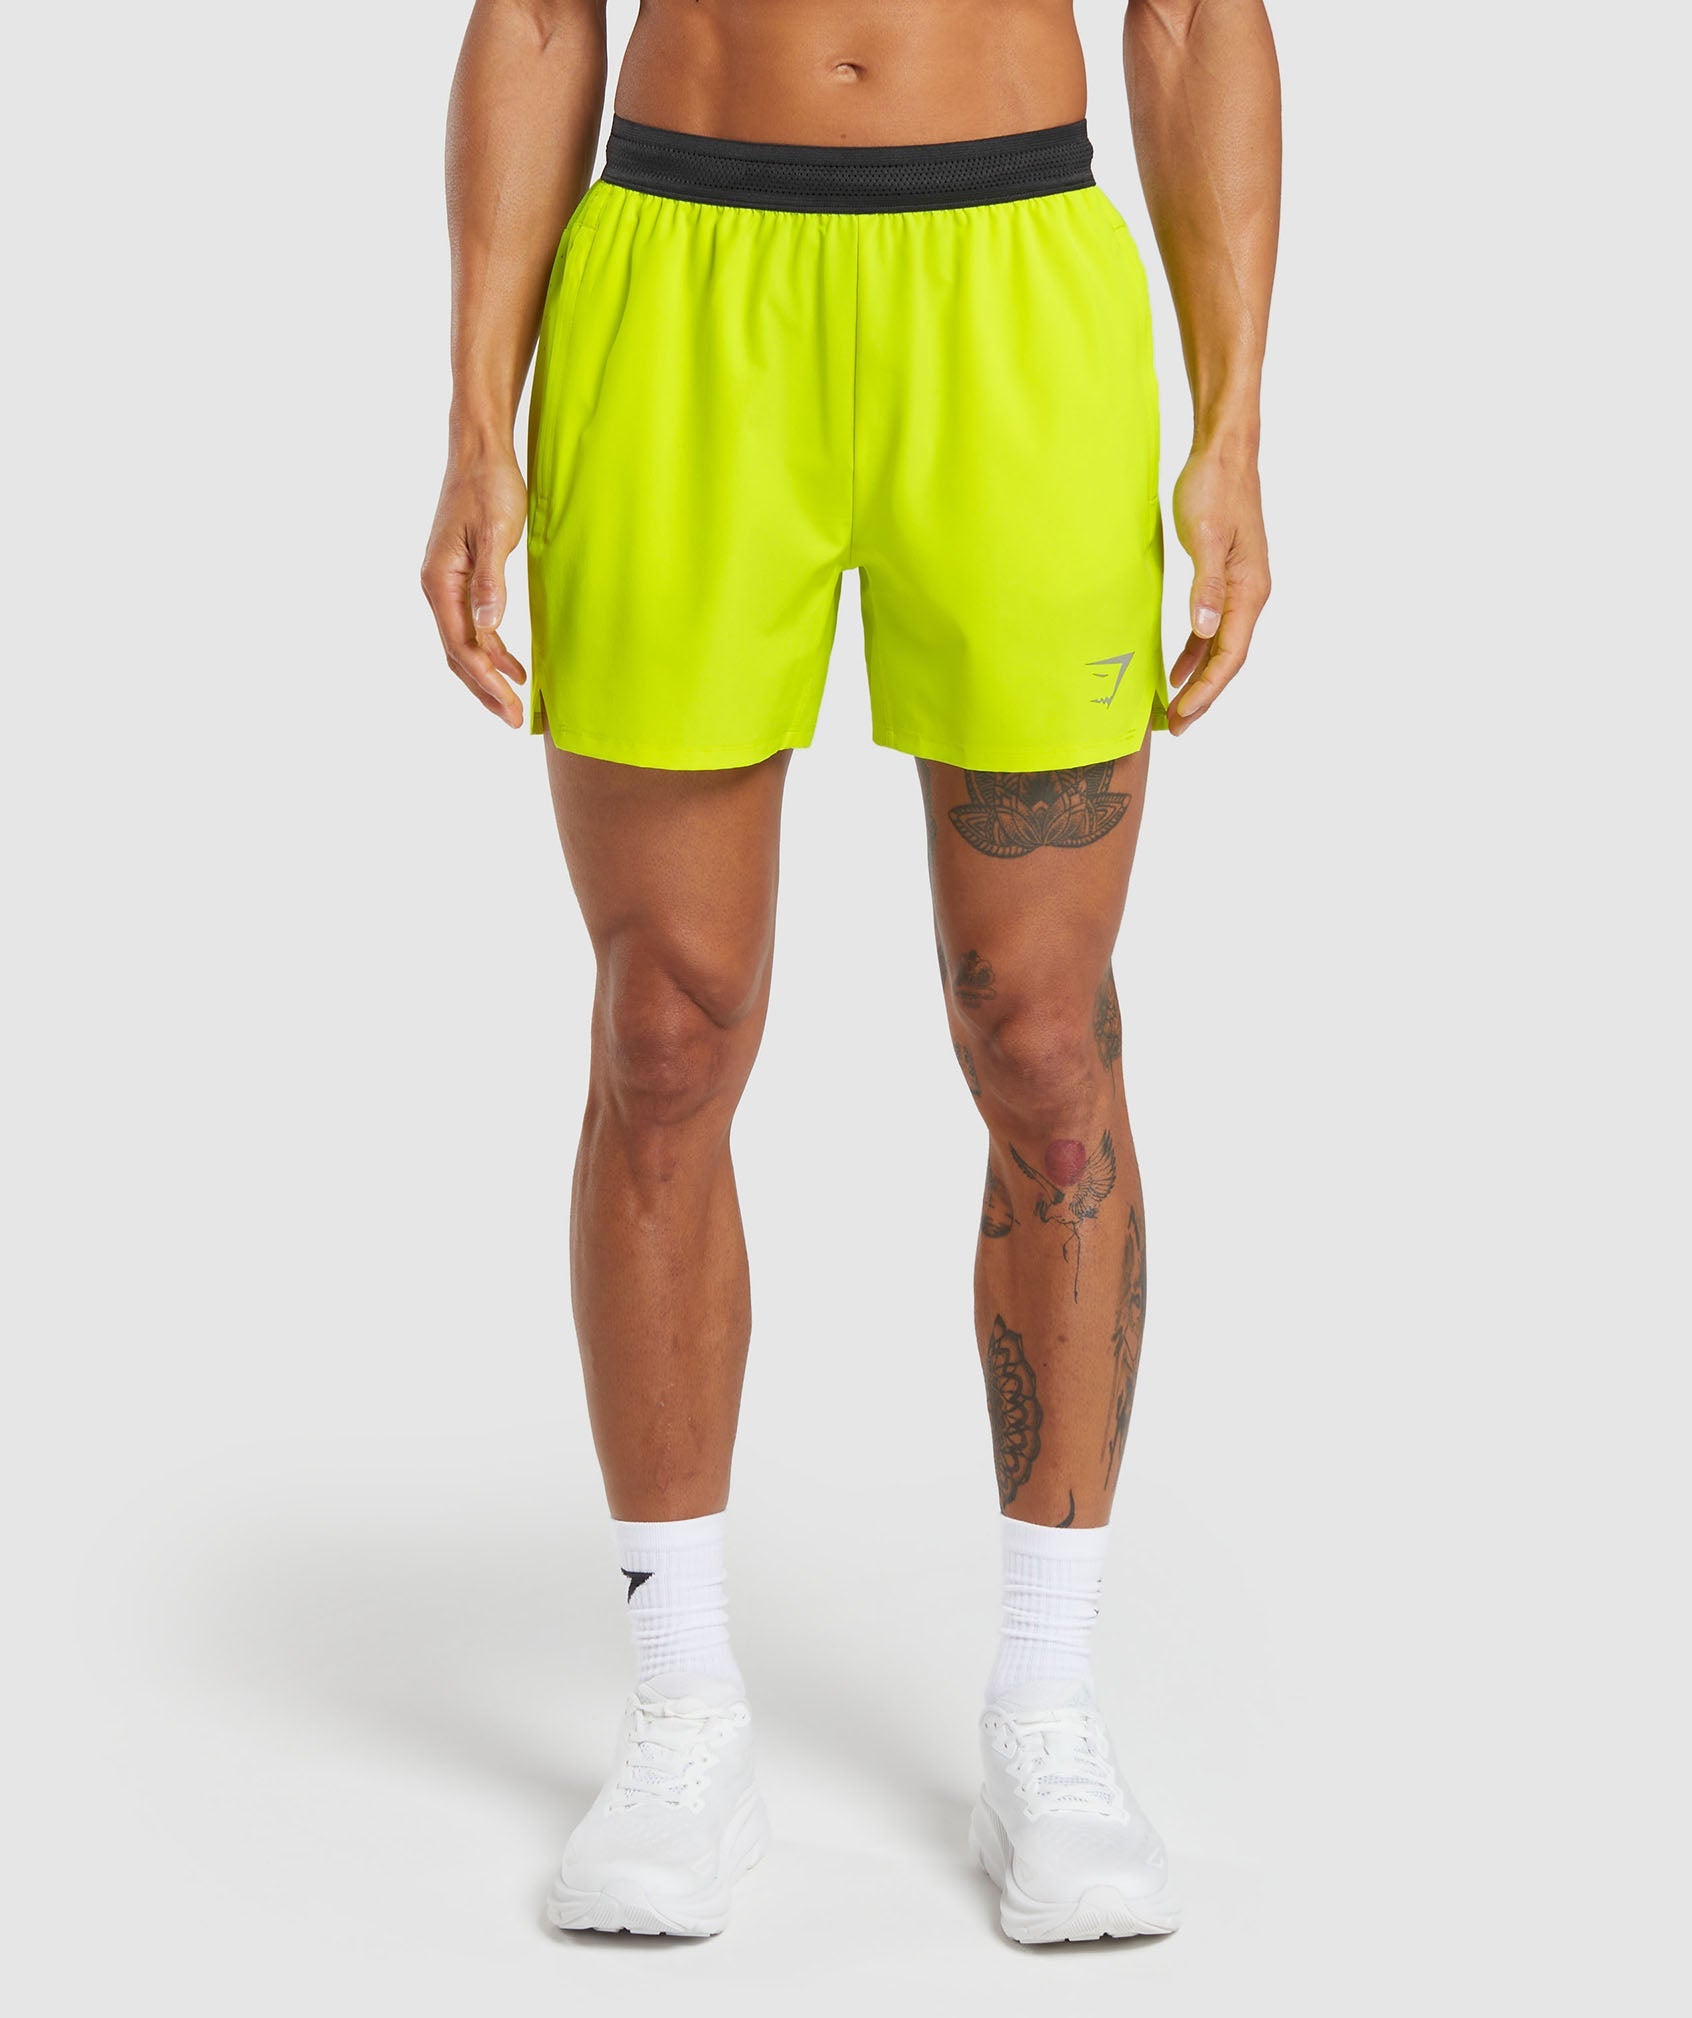 Speed 5" Shorts in Fluo Speed Green - view 1